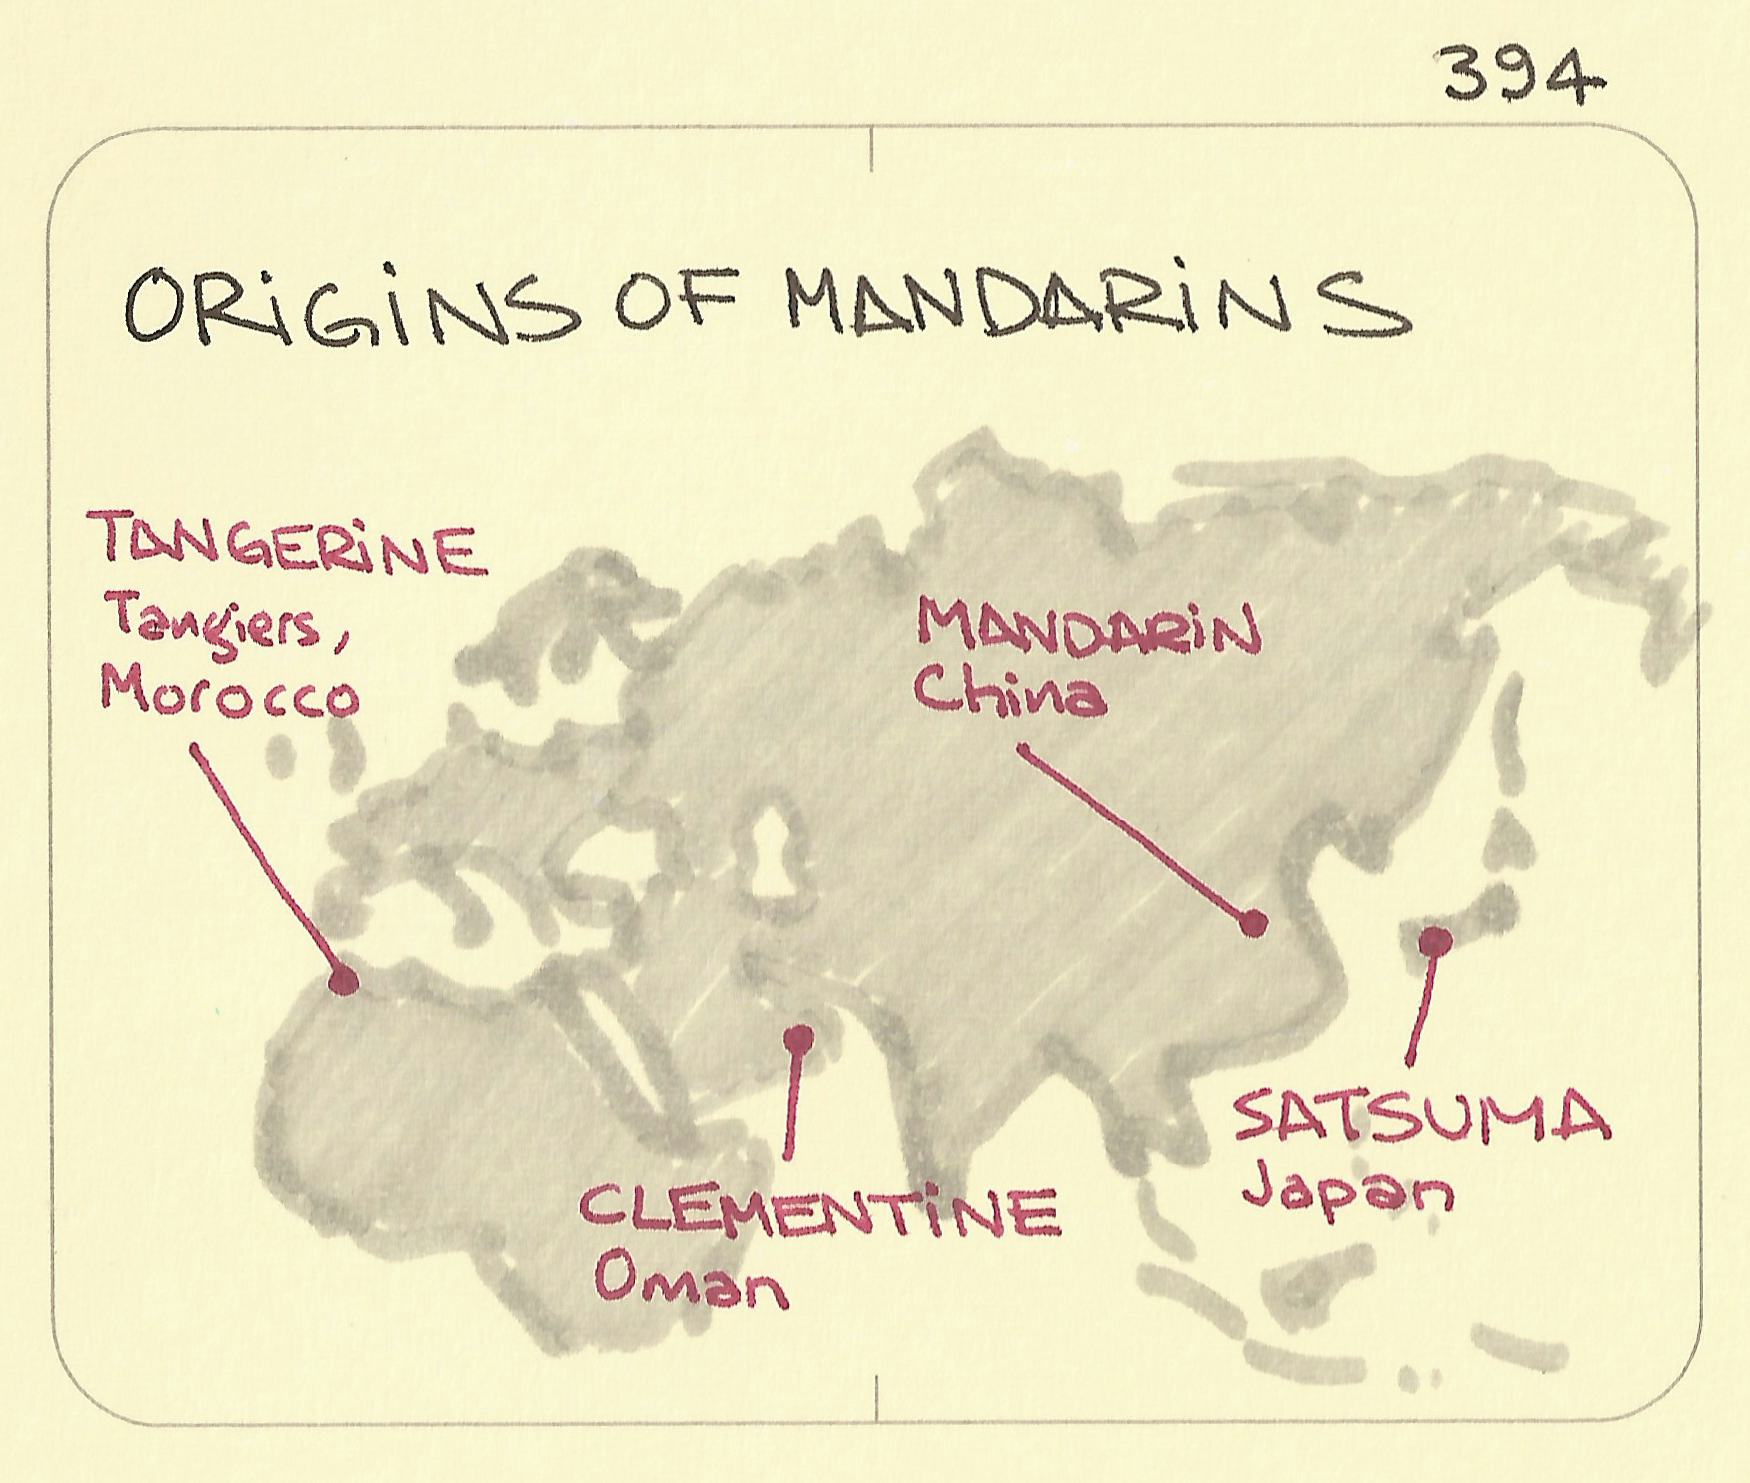 Origins of mandarins world map: including Tangerine from Tangiers, Morocco, Mandarin from China, Clementine from Oman and Satsuma from Japan